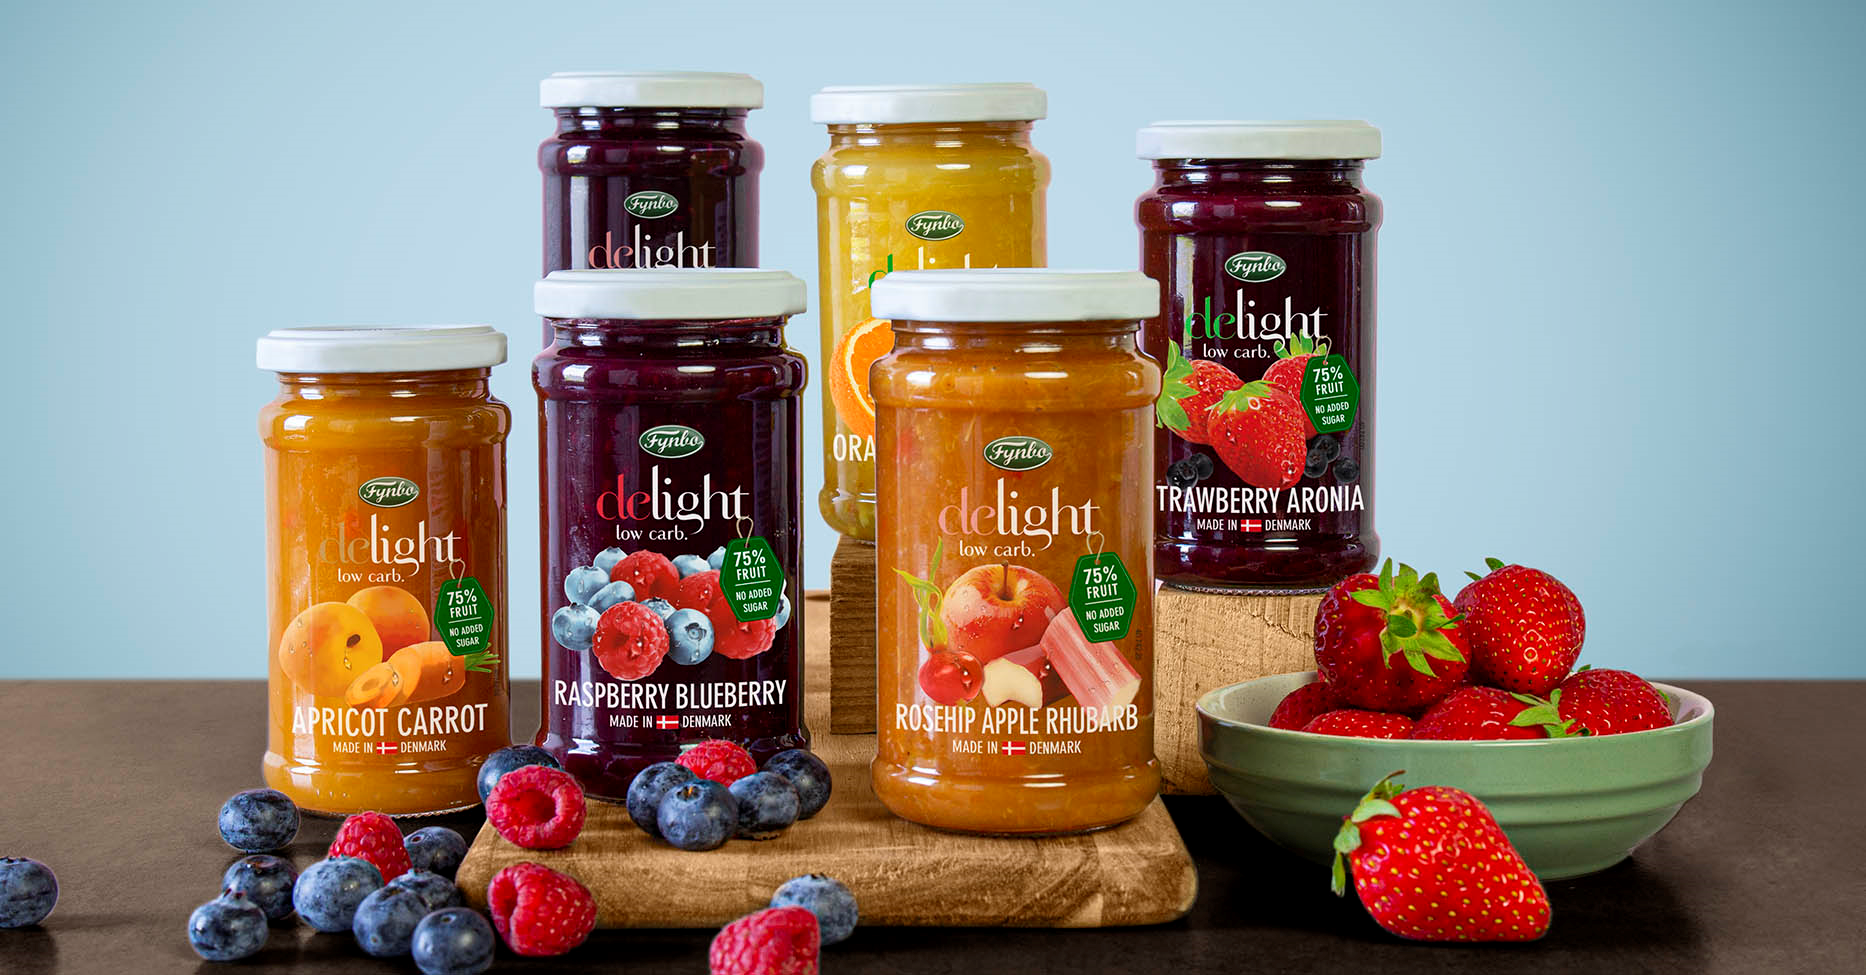 Fynbo-Delight-low-carb-fruitspread-jam-marmalade-apricot.png